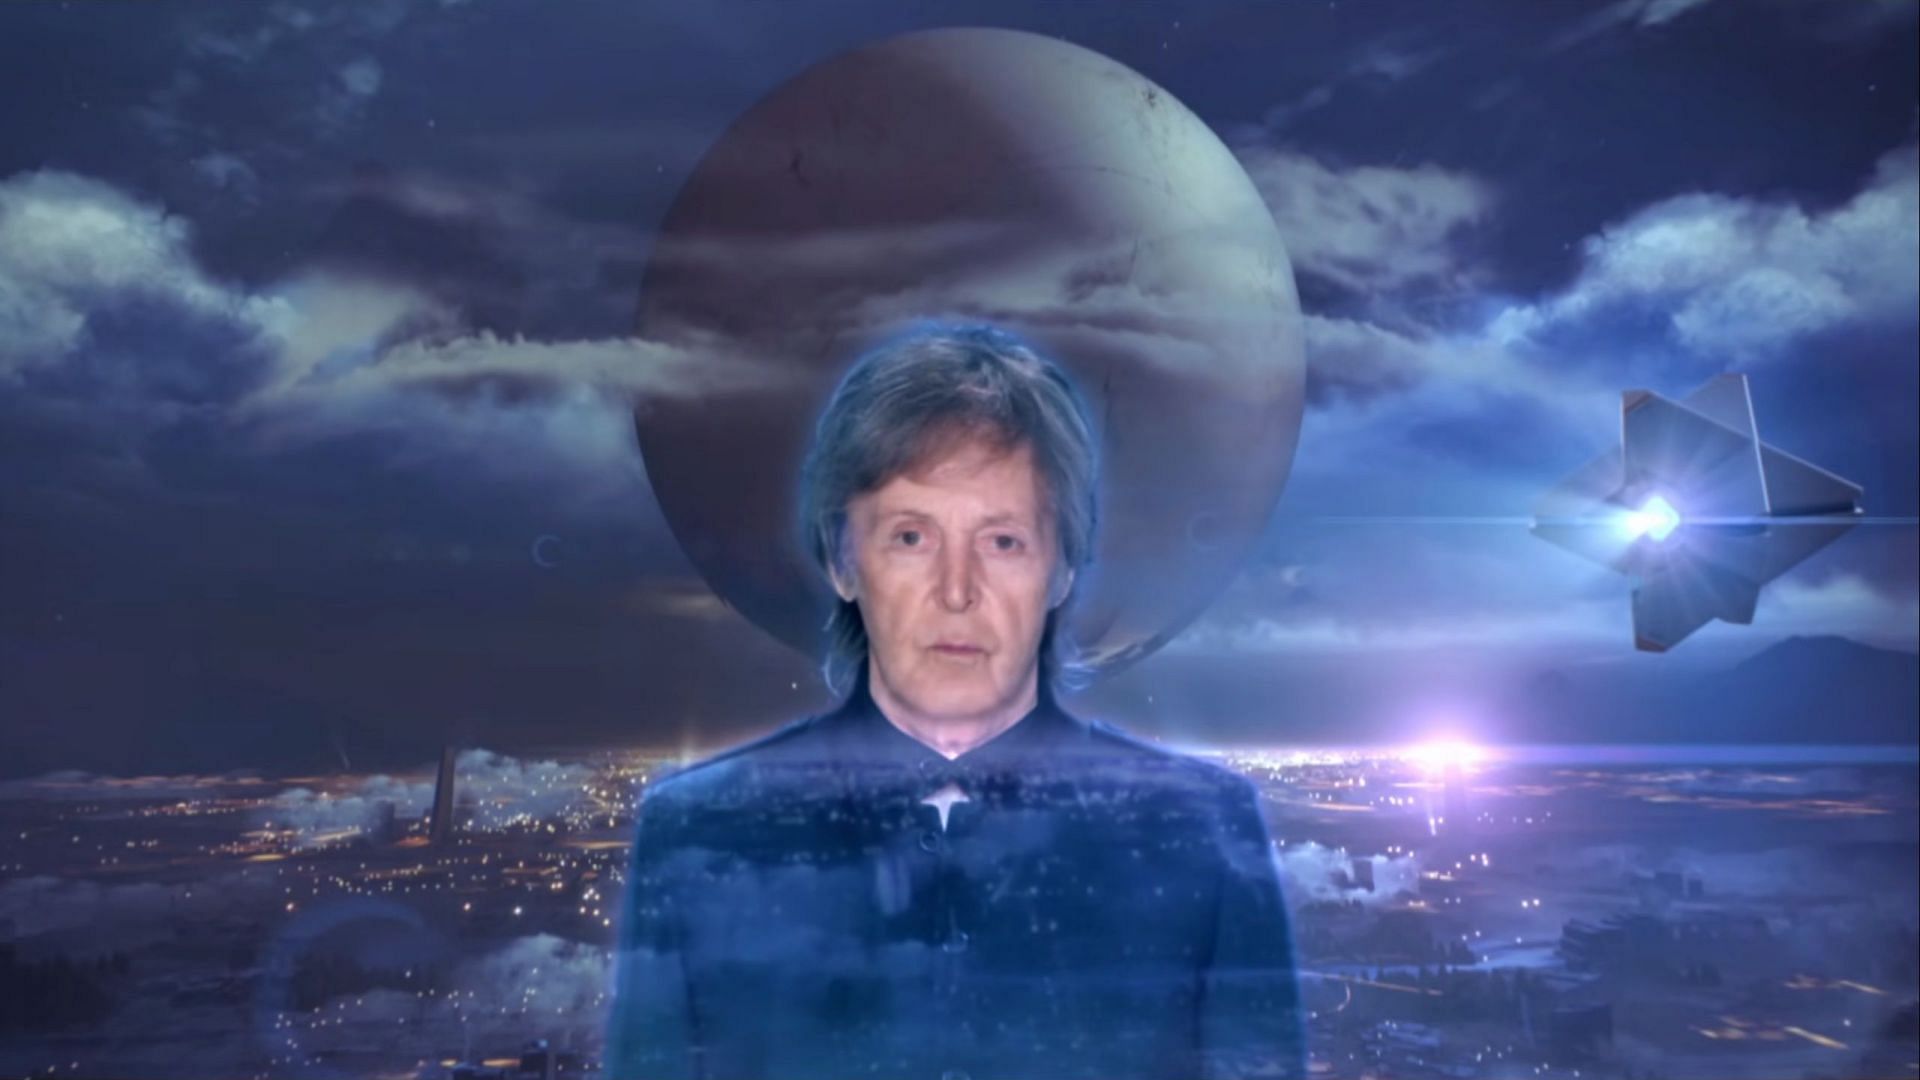 Paul McCartney shown via a Ghost projector in the music video for Destiny 2